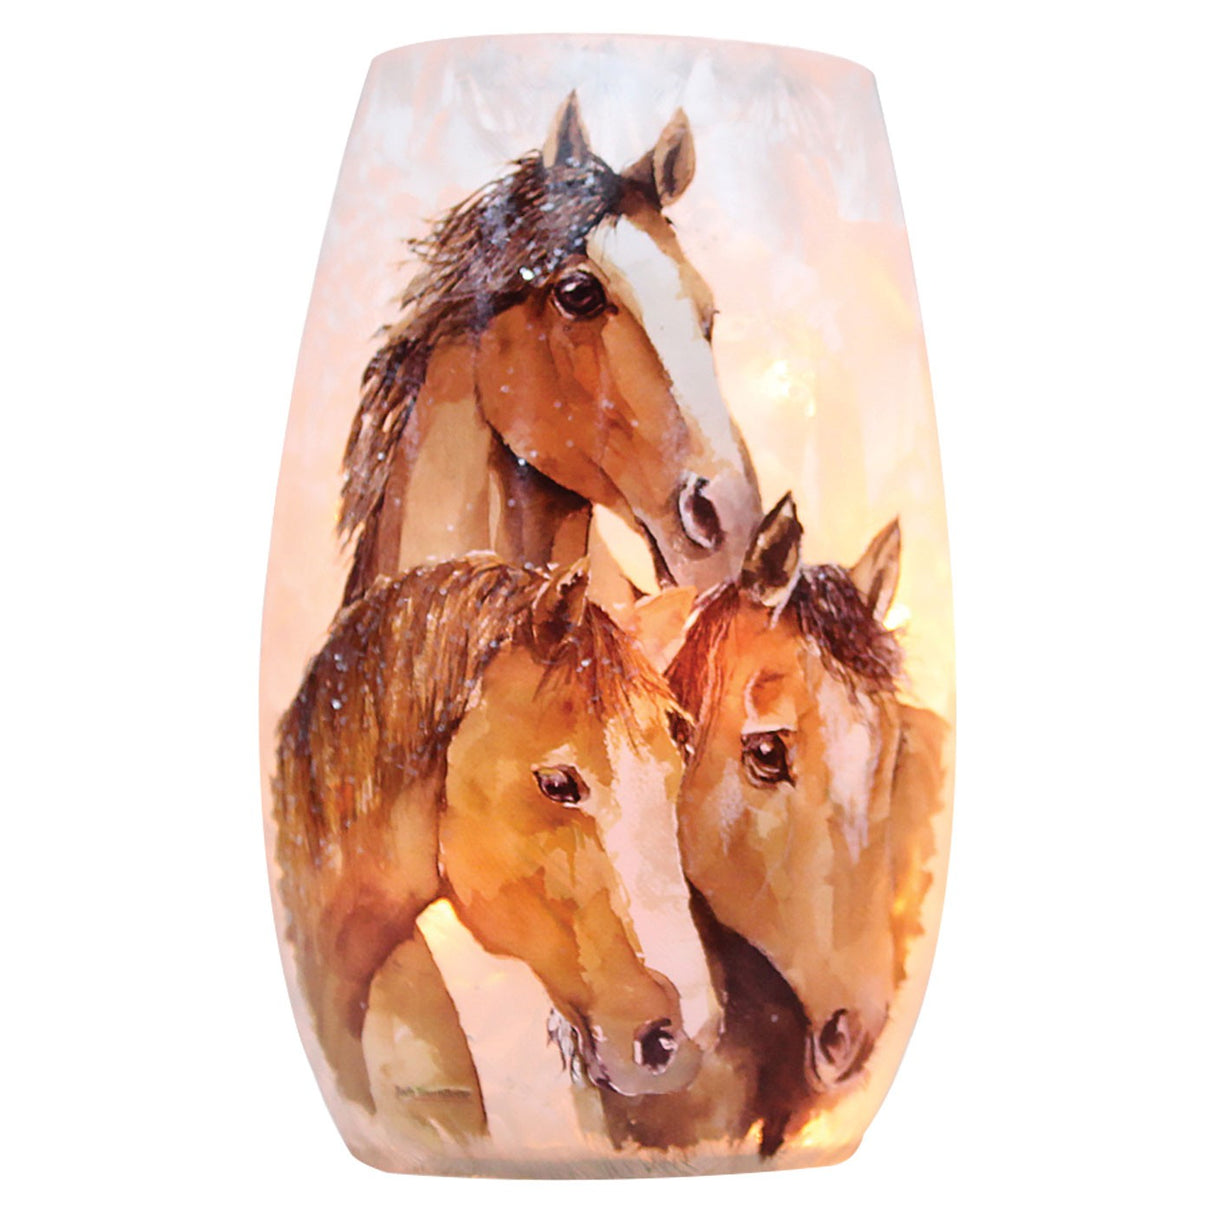 Thoroughbreds Watch Over Me Lighted Vase